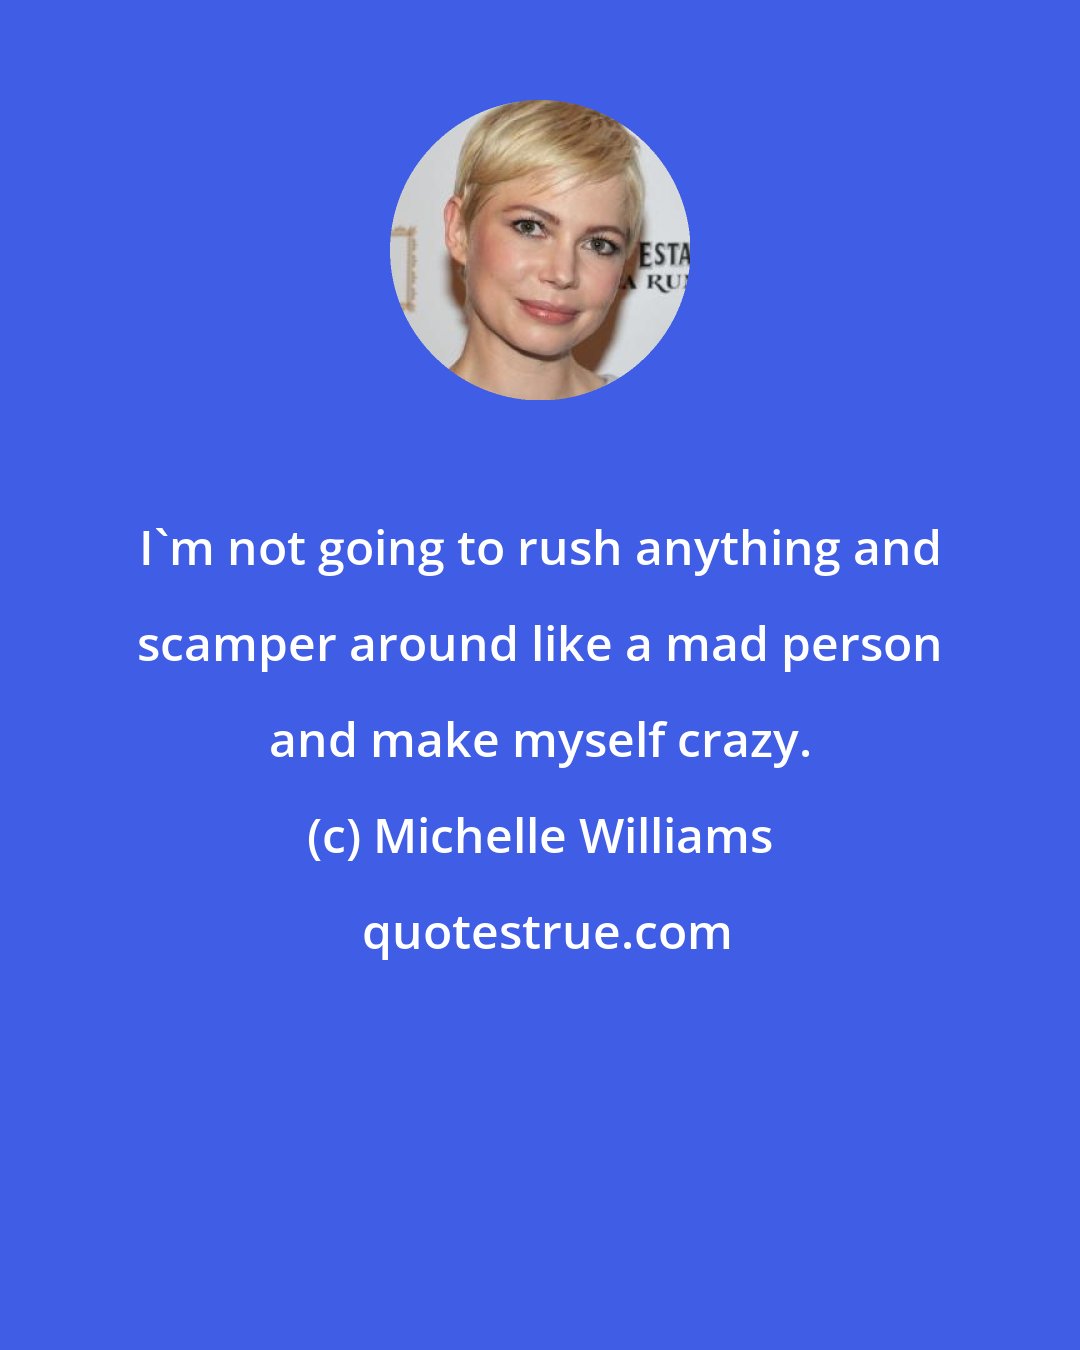 Michelle Williams: I'm not going to rush anything and scamper around like a mad person and make myself crazy.